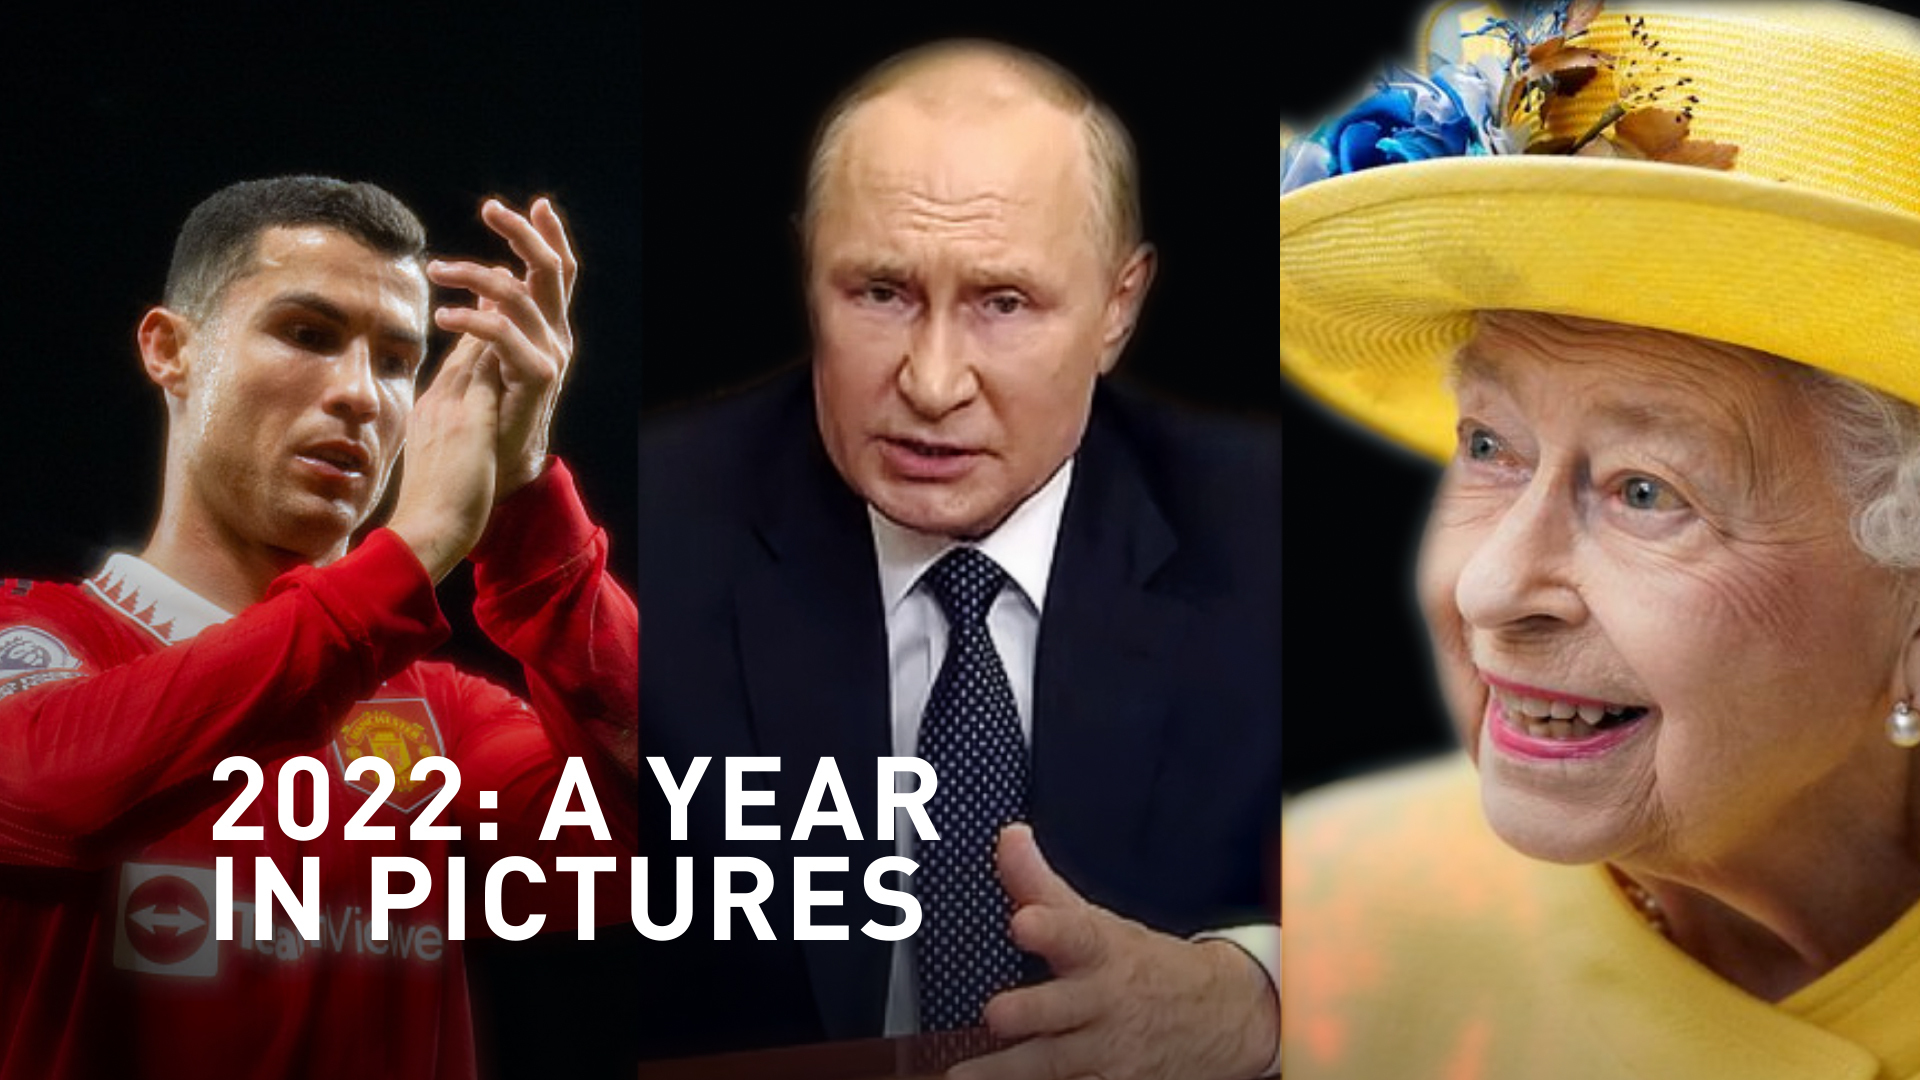 A Year in Pictures: Europe's top stories of 2022 in 20 paradigm-shifting images